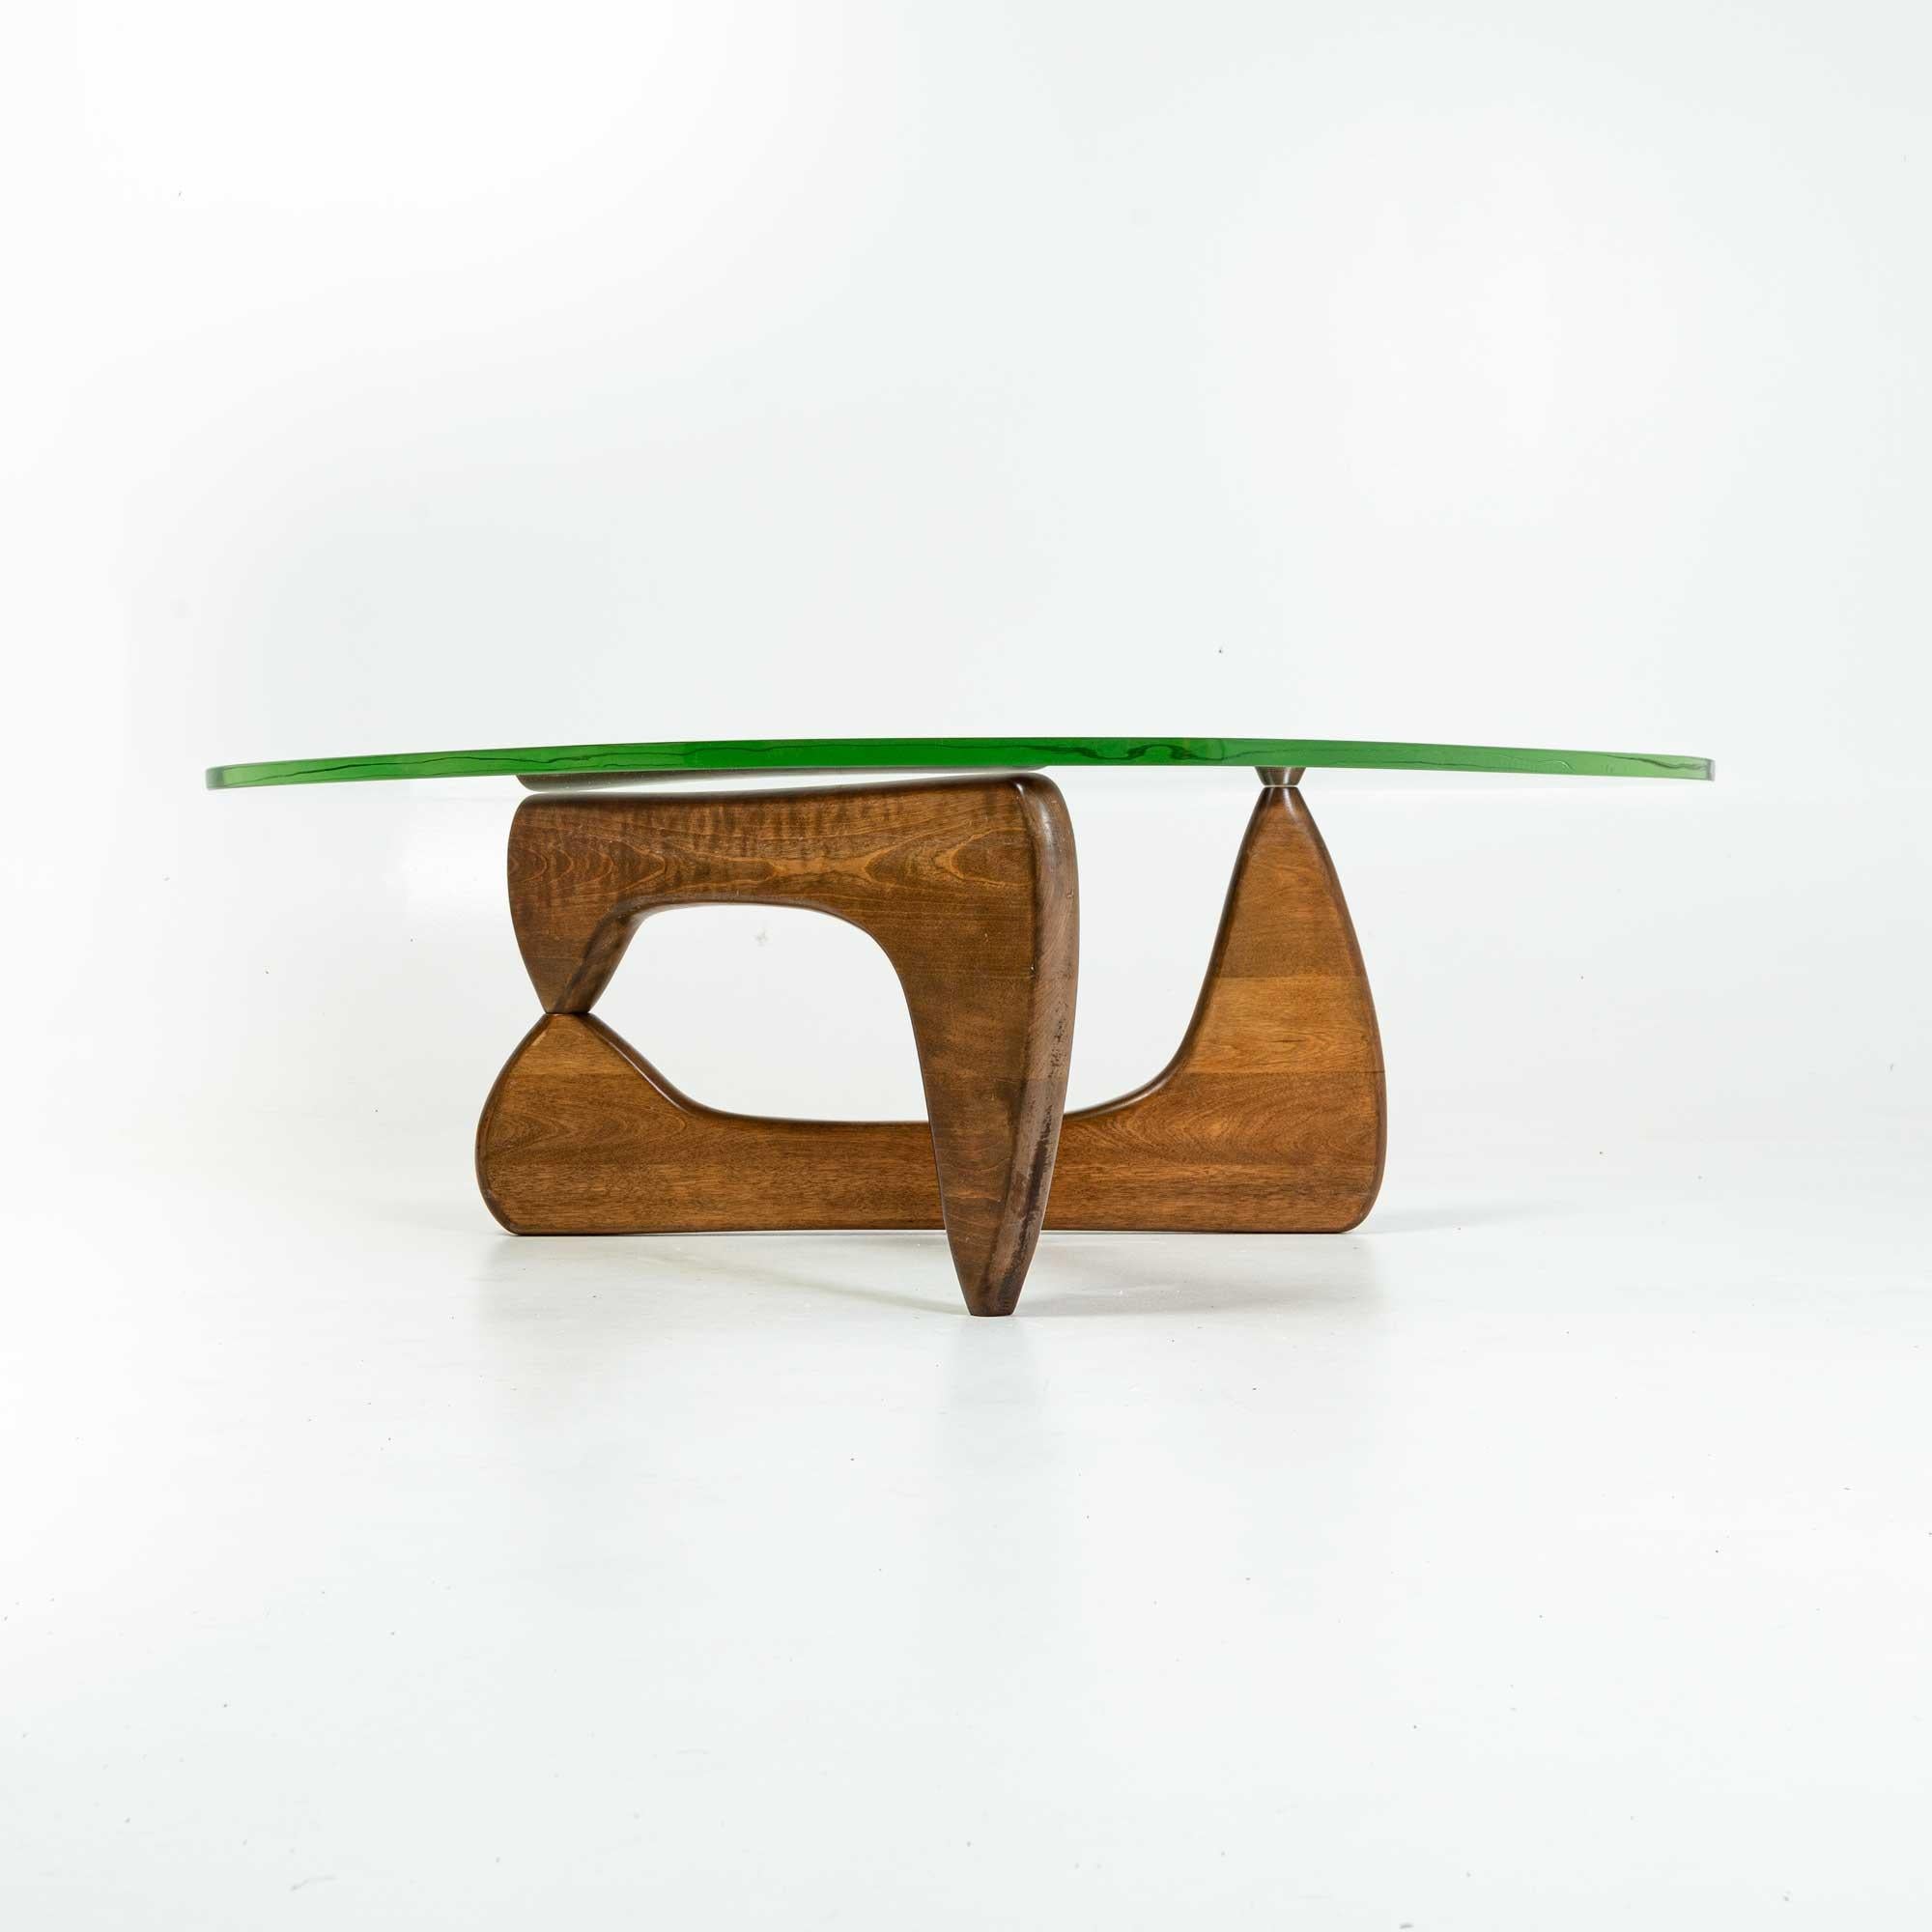 An early Noguchi IN50 coffee table with the original green glass, early 1950s. blonde base with pantina matching age, straight pin ( later pins has locking fins). Some light scratches on the glass, no chips.

Authenticity- this table is guaranteed